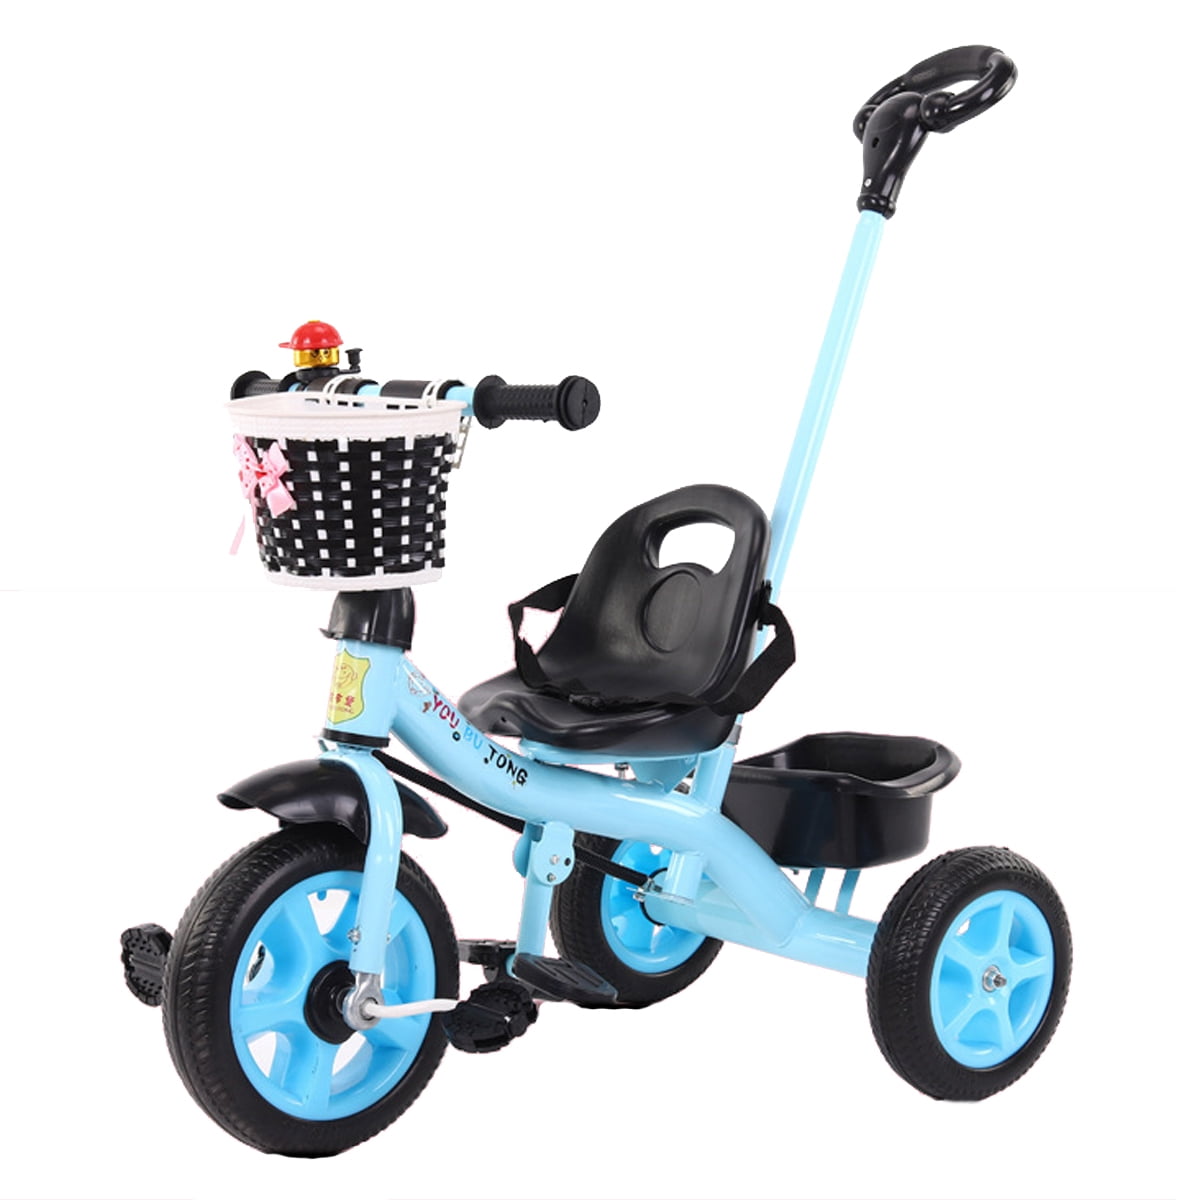 1-6 Year Old Baby Push Pedal Bike Childrens Tricycle Foldable Foot Pedal Seat Can Be Adjusted Front and Back Kindergarten Stroller